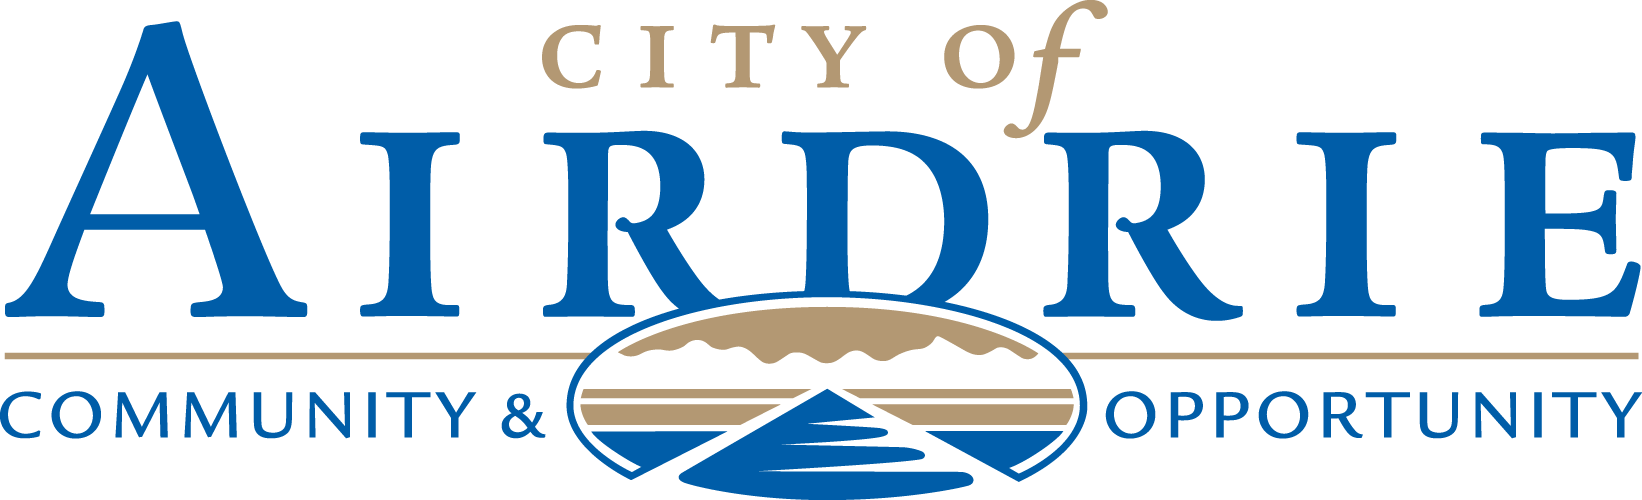 Logo for the city of Airdrie, Canada